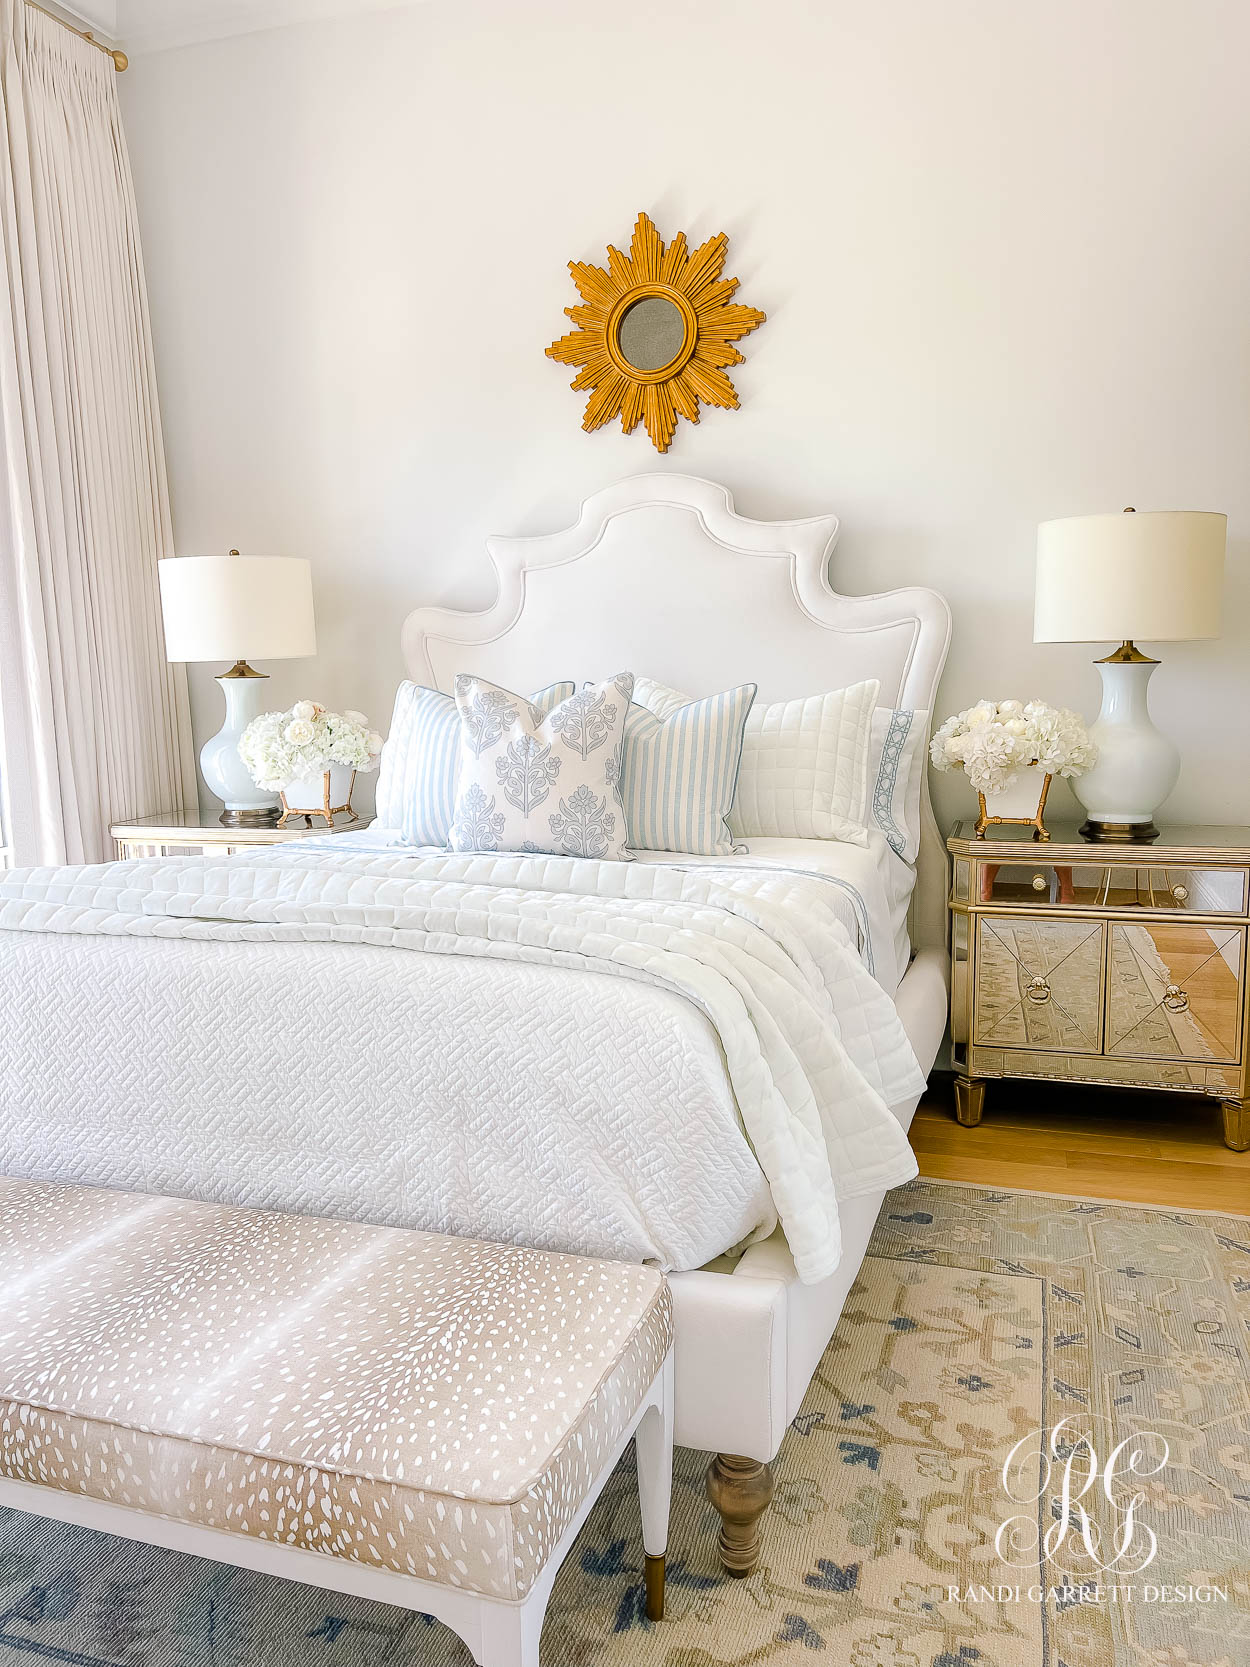 My Look for Less Queen Bed Styling